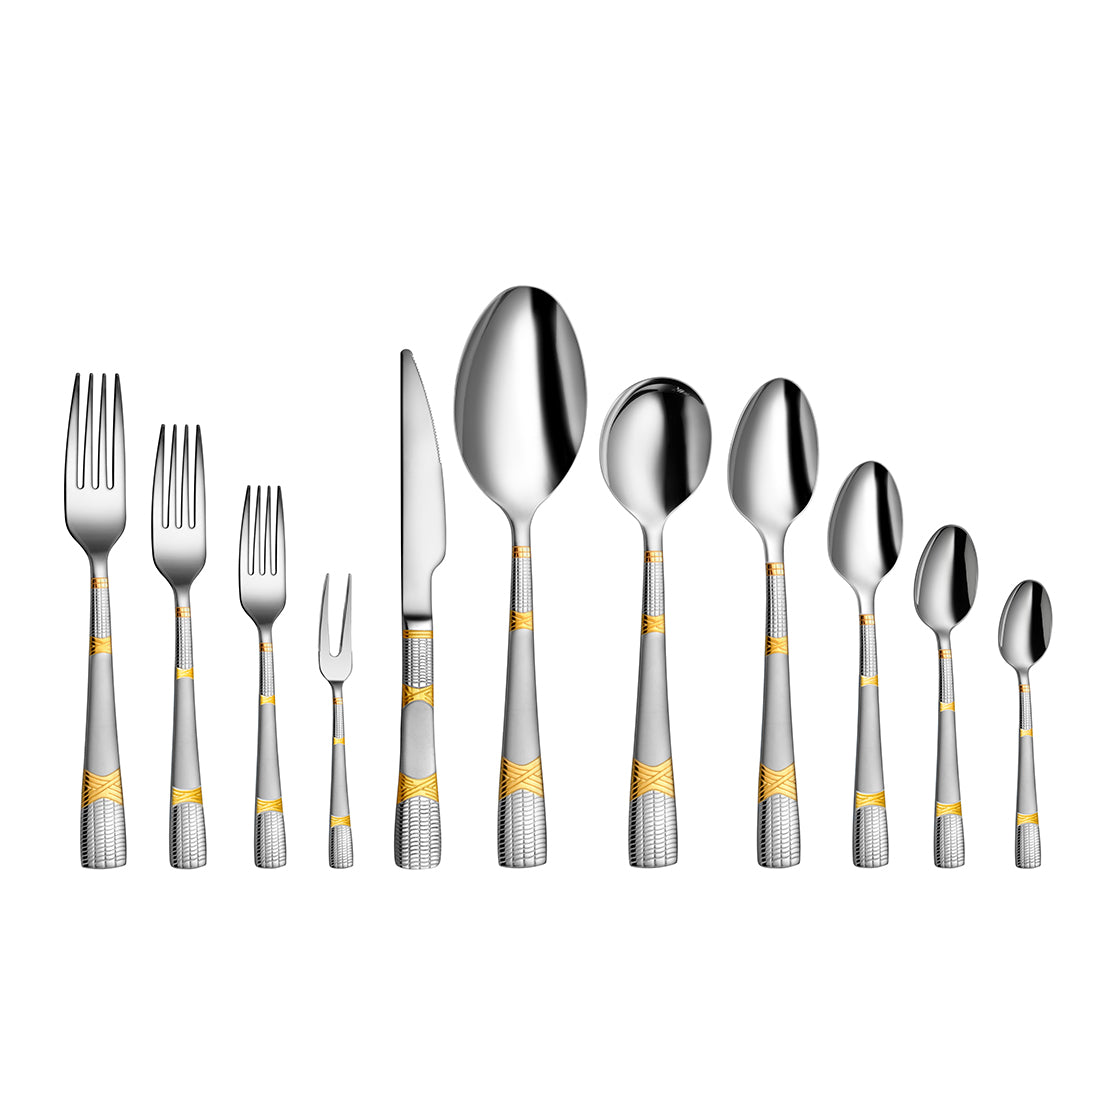 Stainless Steel Cutlery Lush